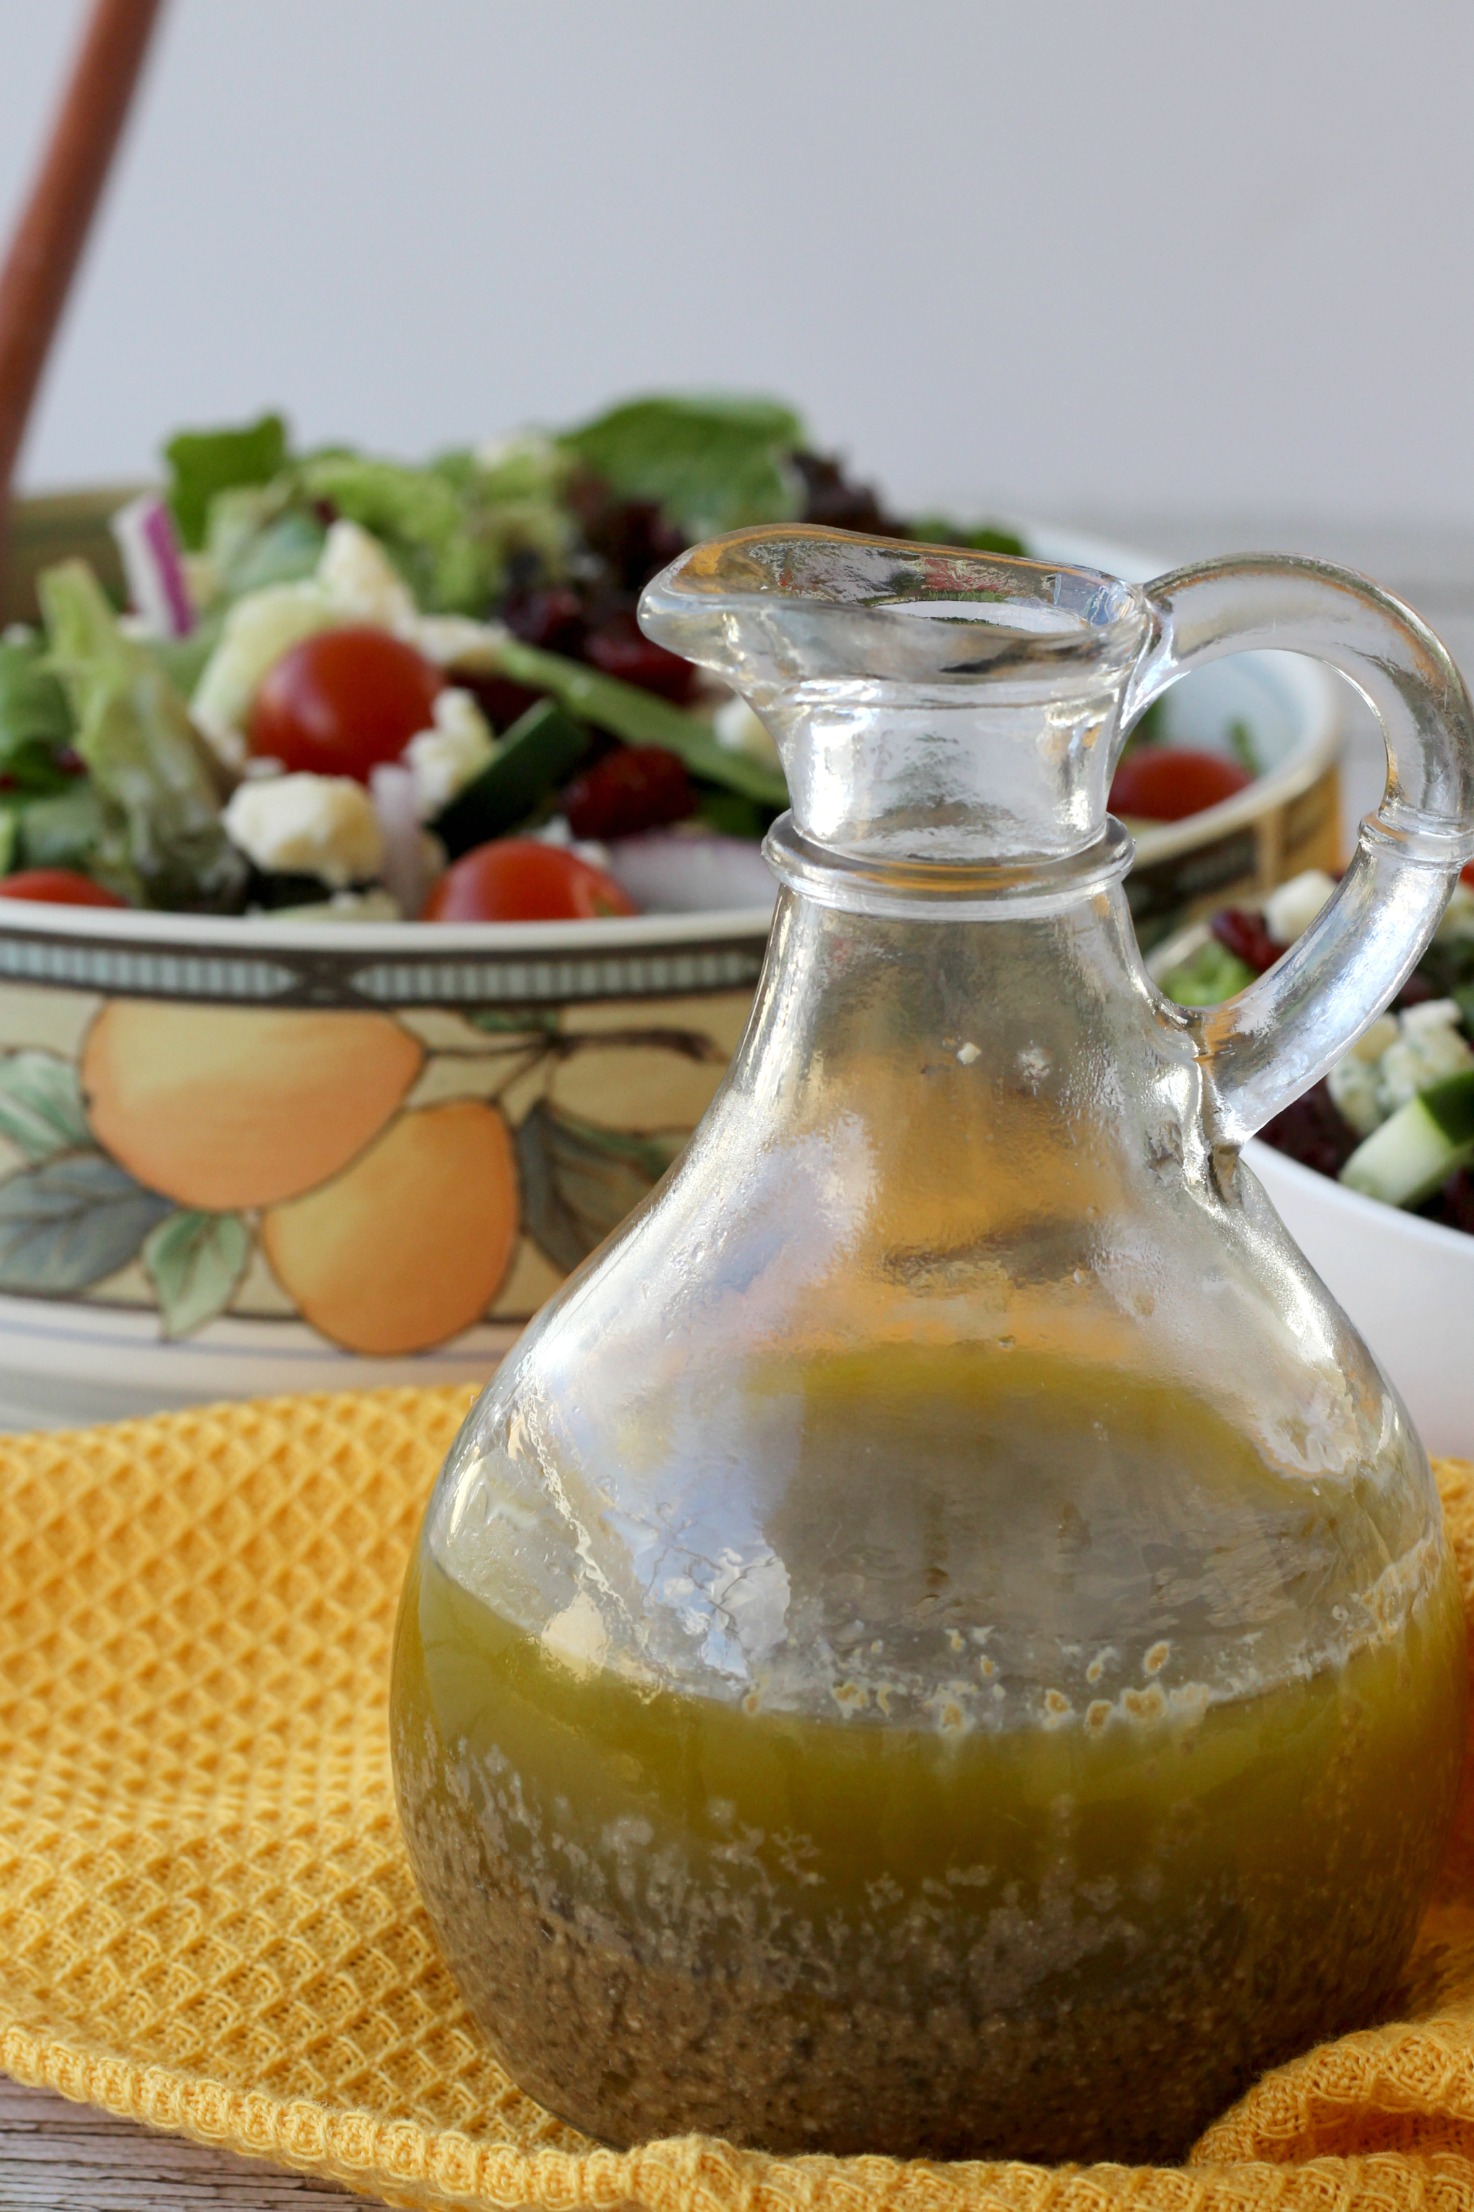 A pitcher of blue cheese dressing on a table next to a salad.